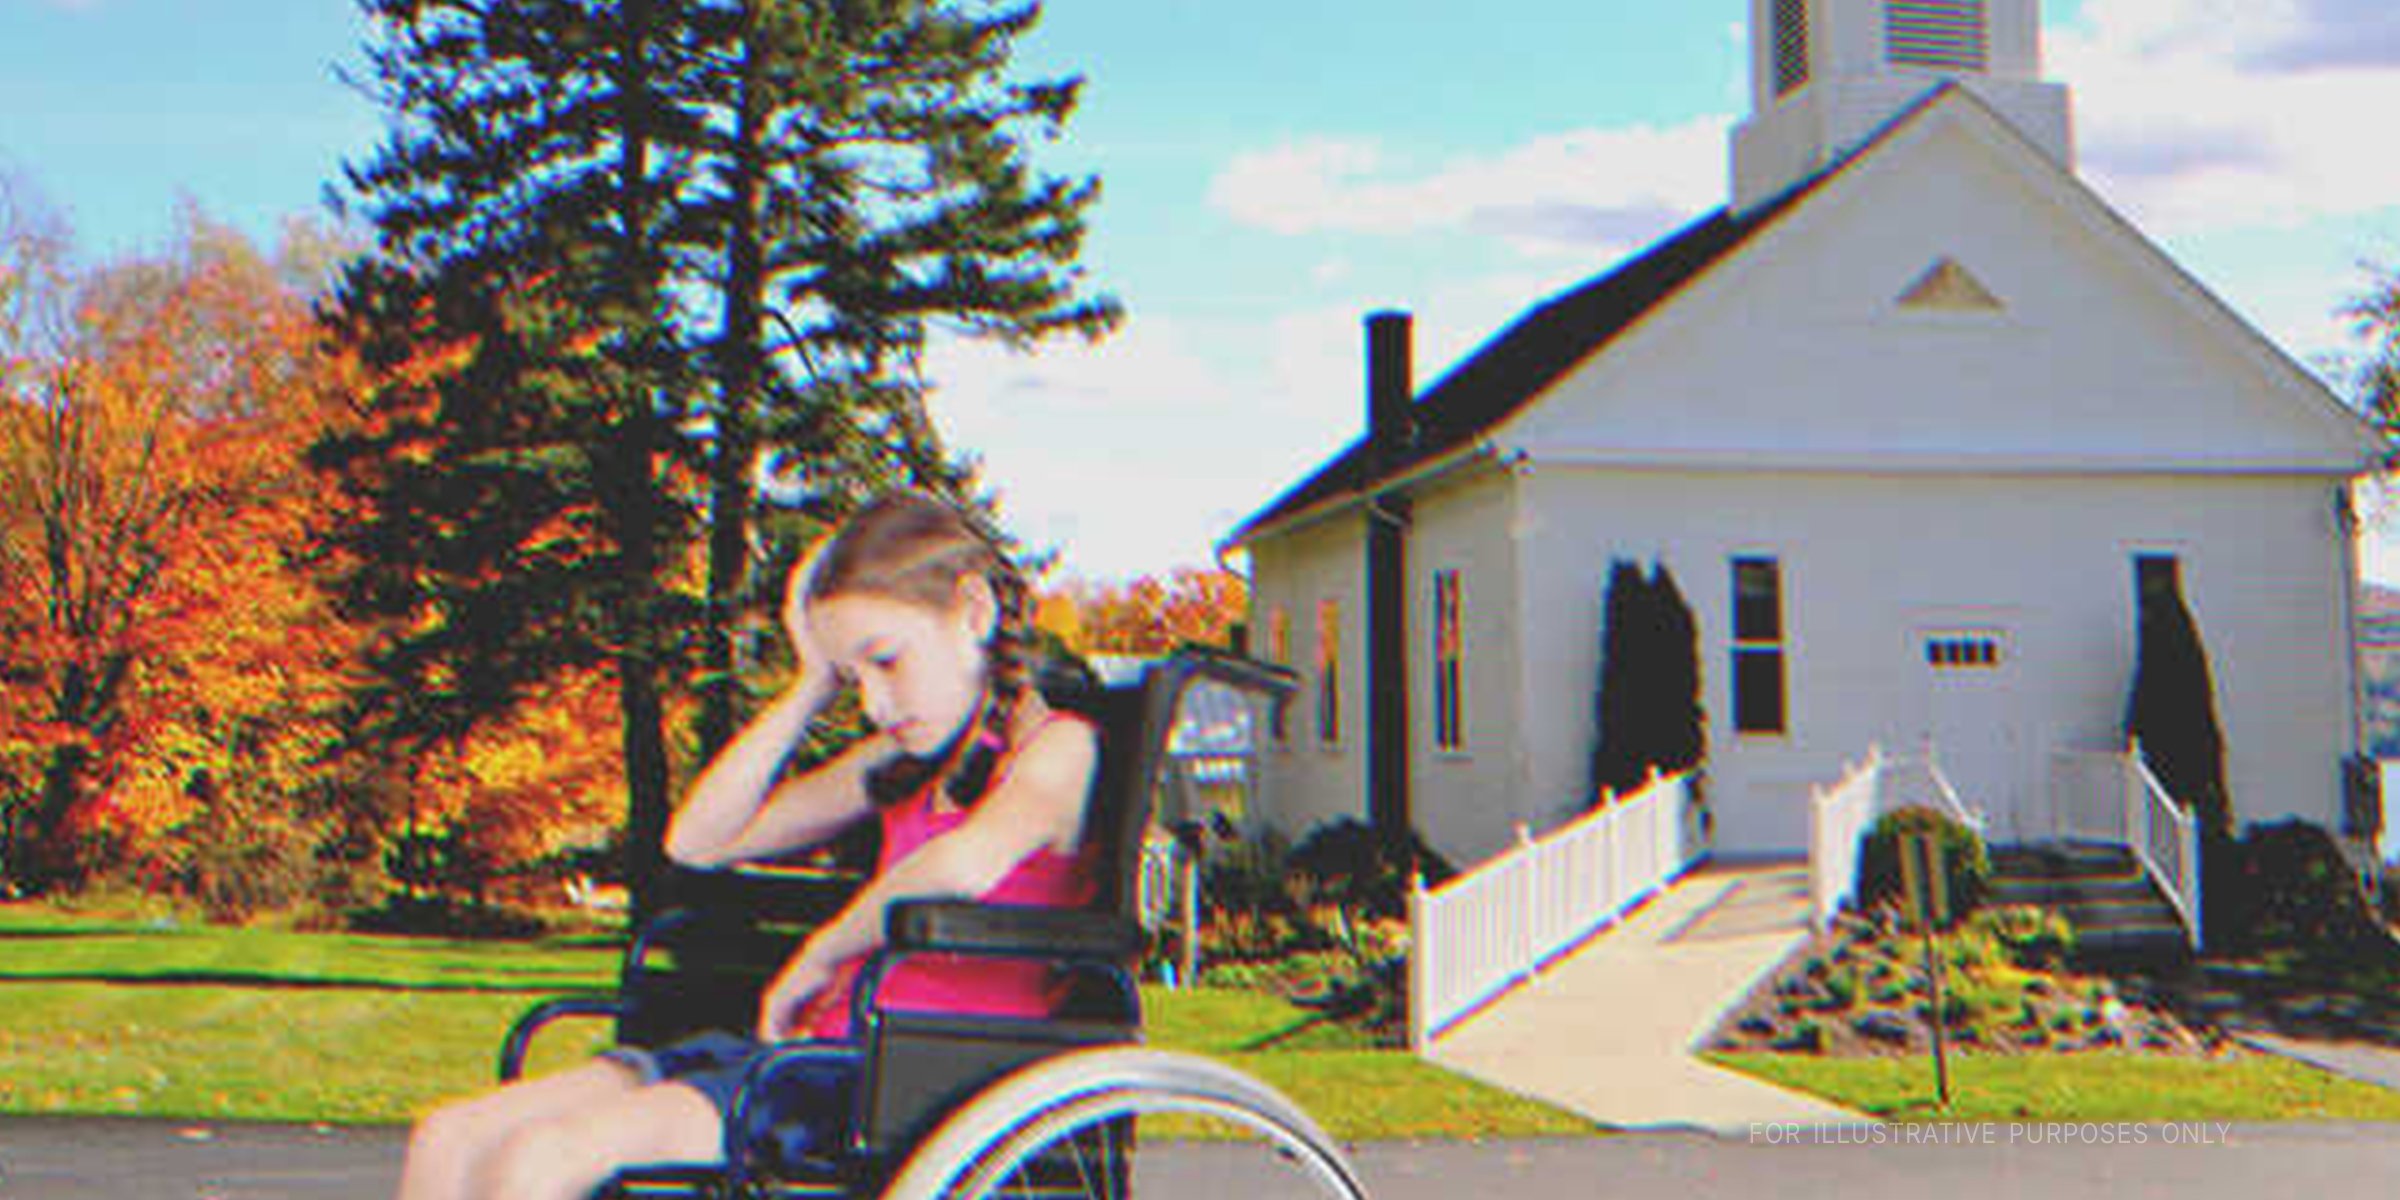 A girl in a wheelchair in front of a church | Source: Shutterstock